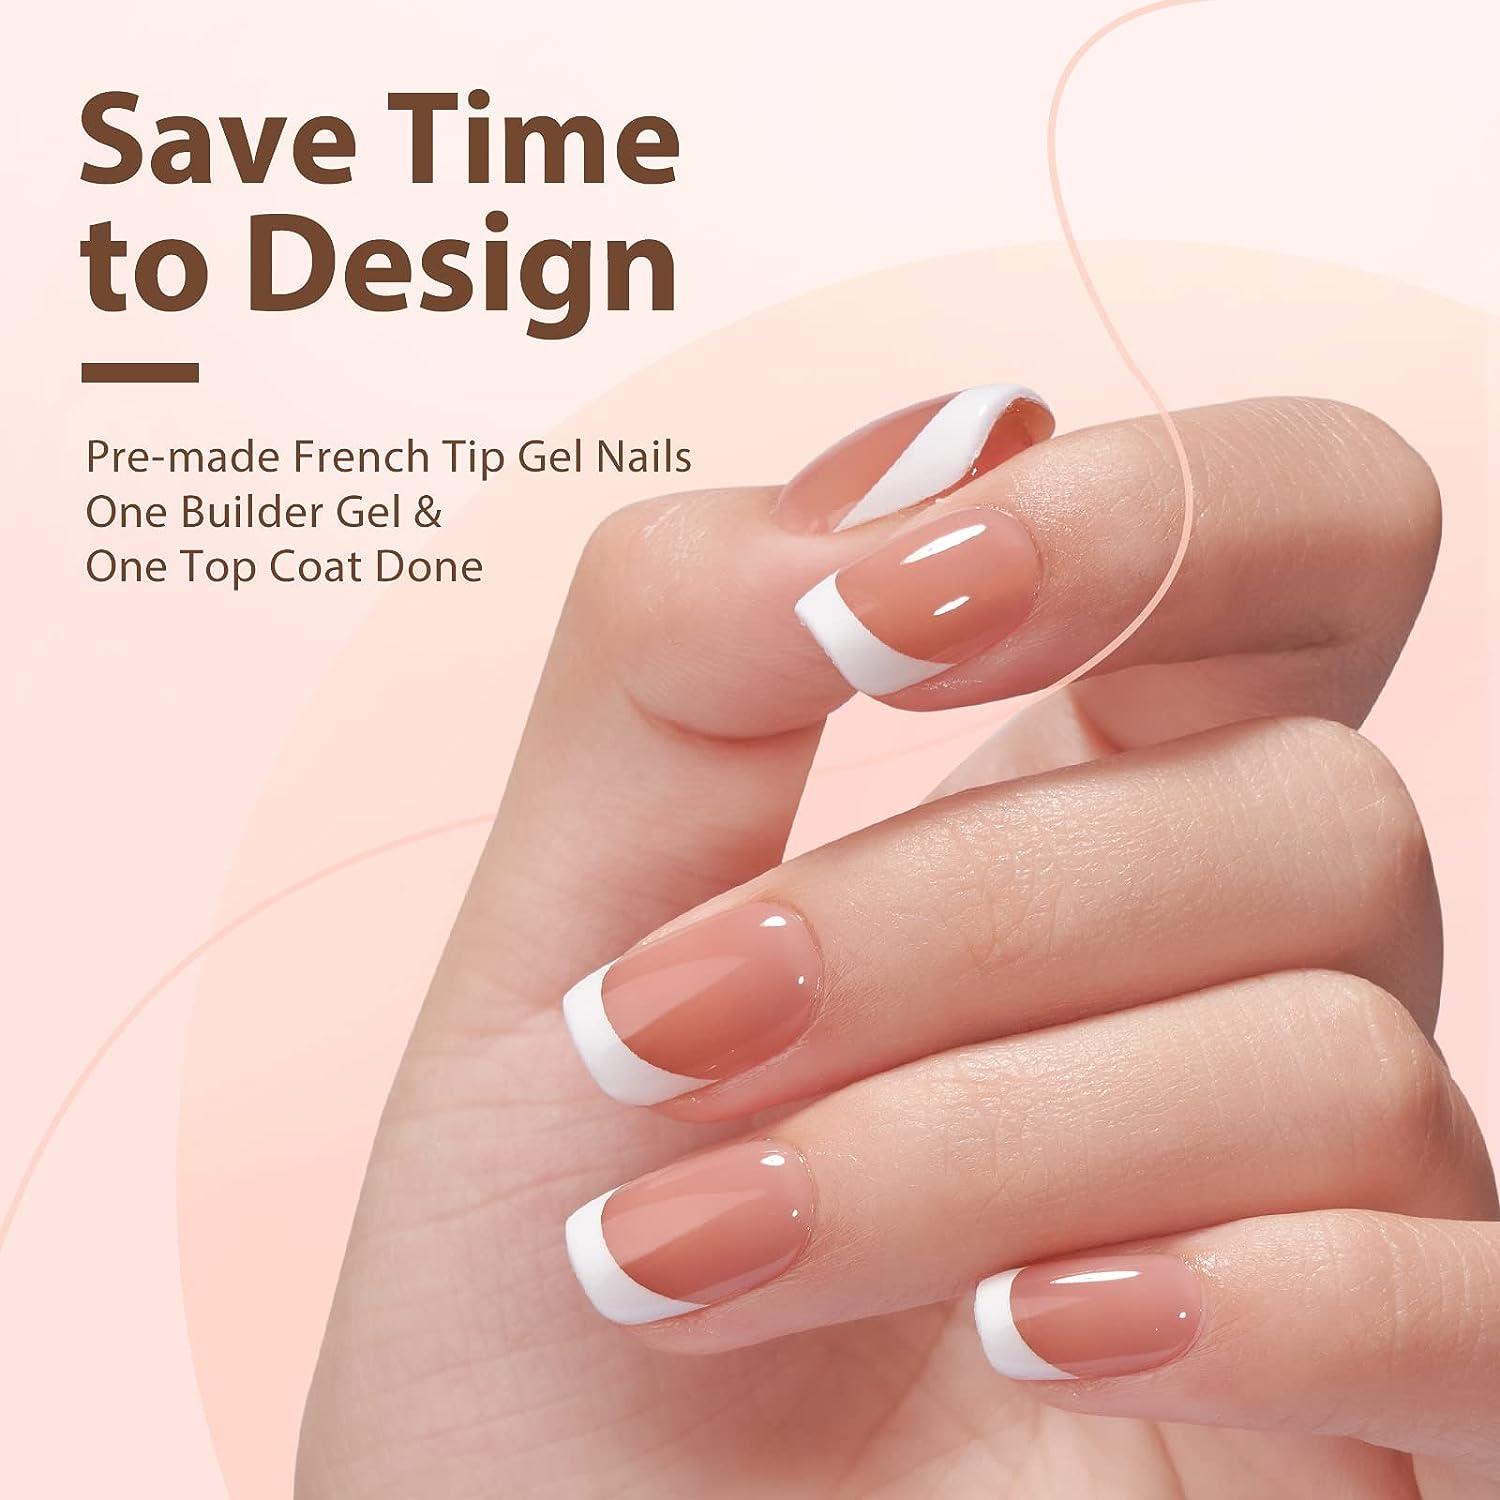 Mshare 50ML Clear UV Builder Gel For Nail Extensions, Hard Construction Gel  For French Manicure, Nude Nail Art From Hui0007, $19.17 | DHgate.Com